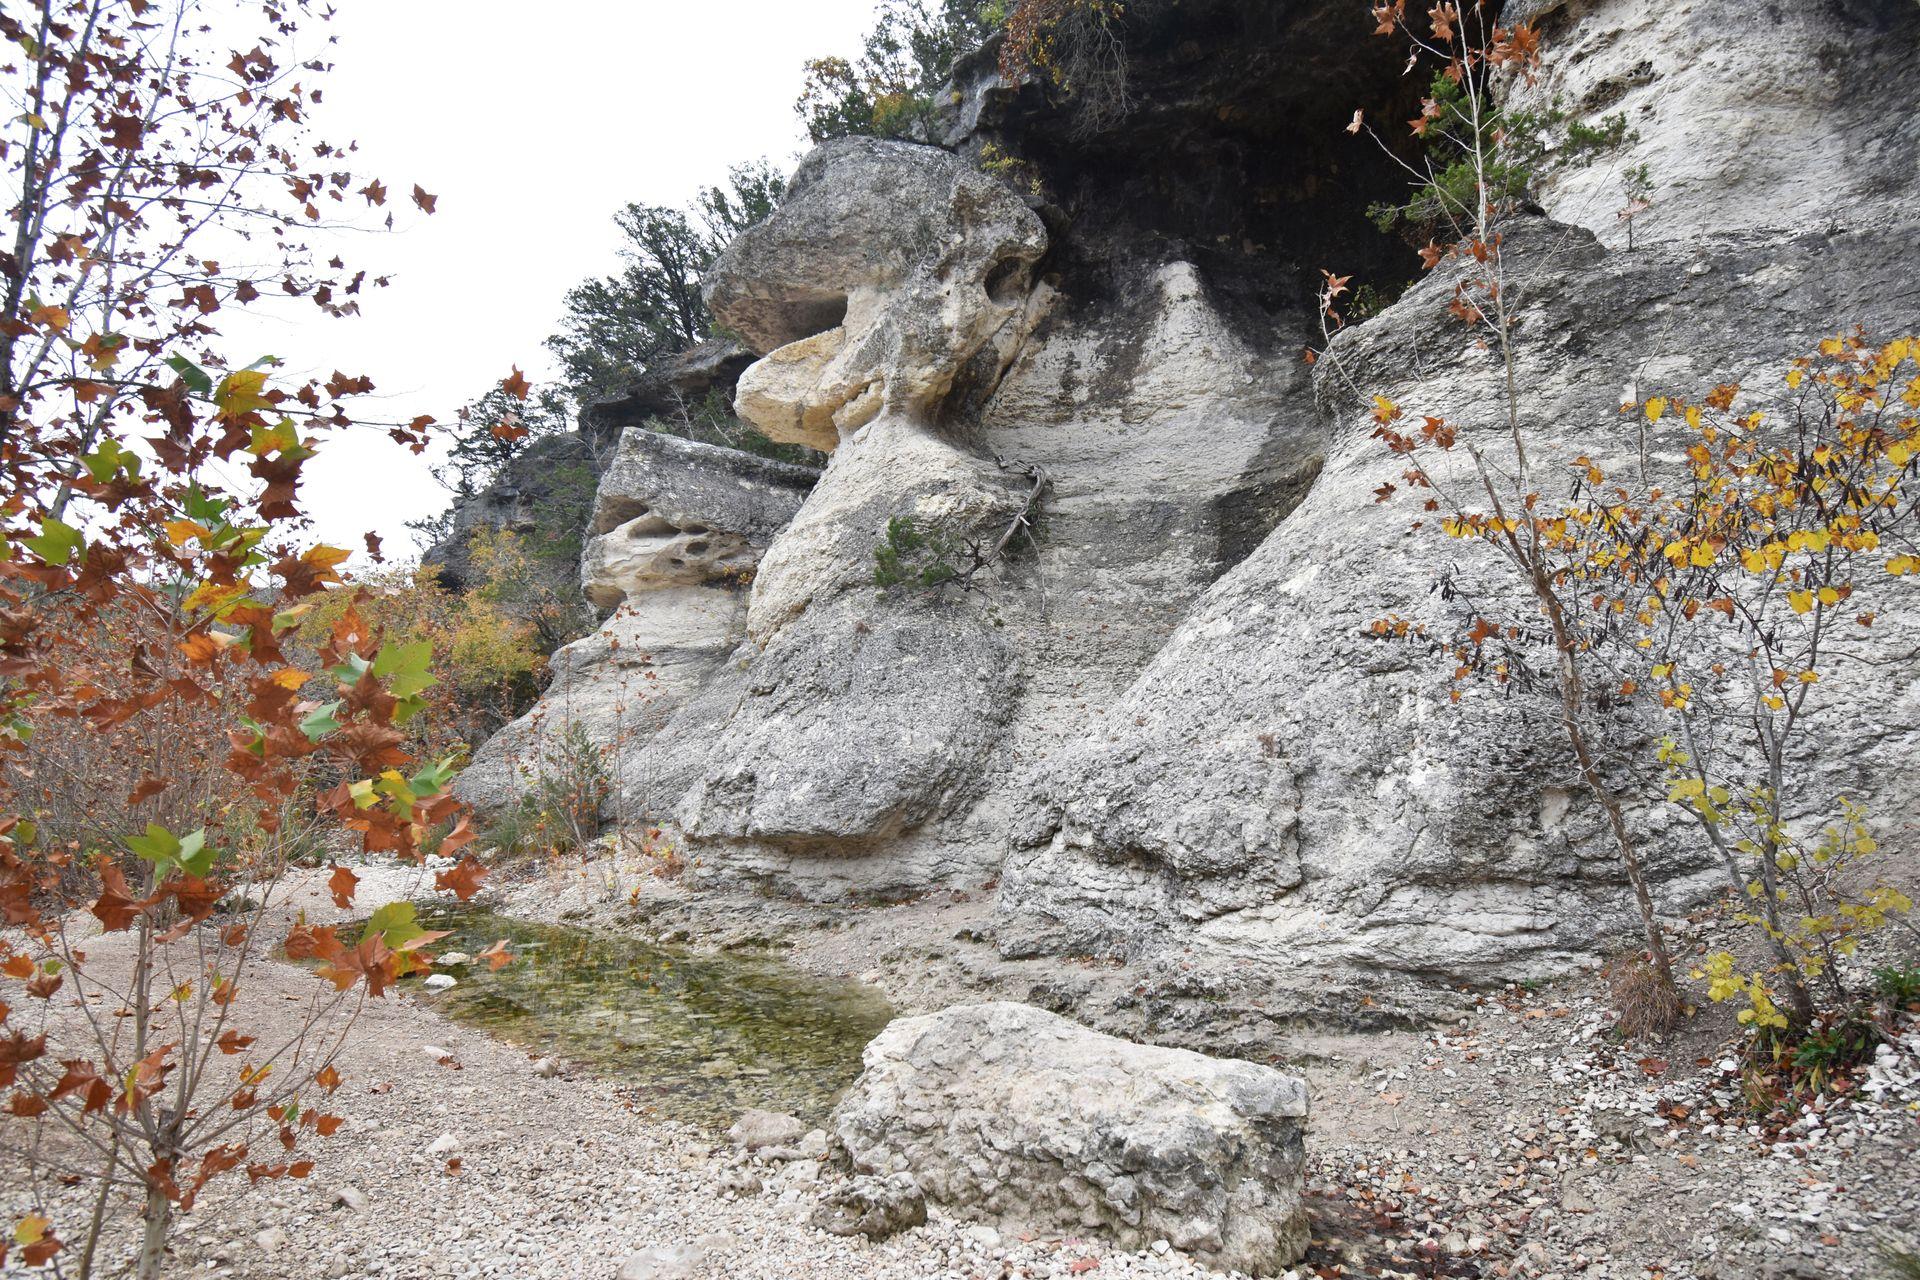 A rock formation that resembles a monkey along the East Trail in Lost Maples.